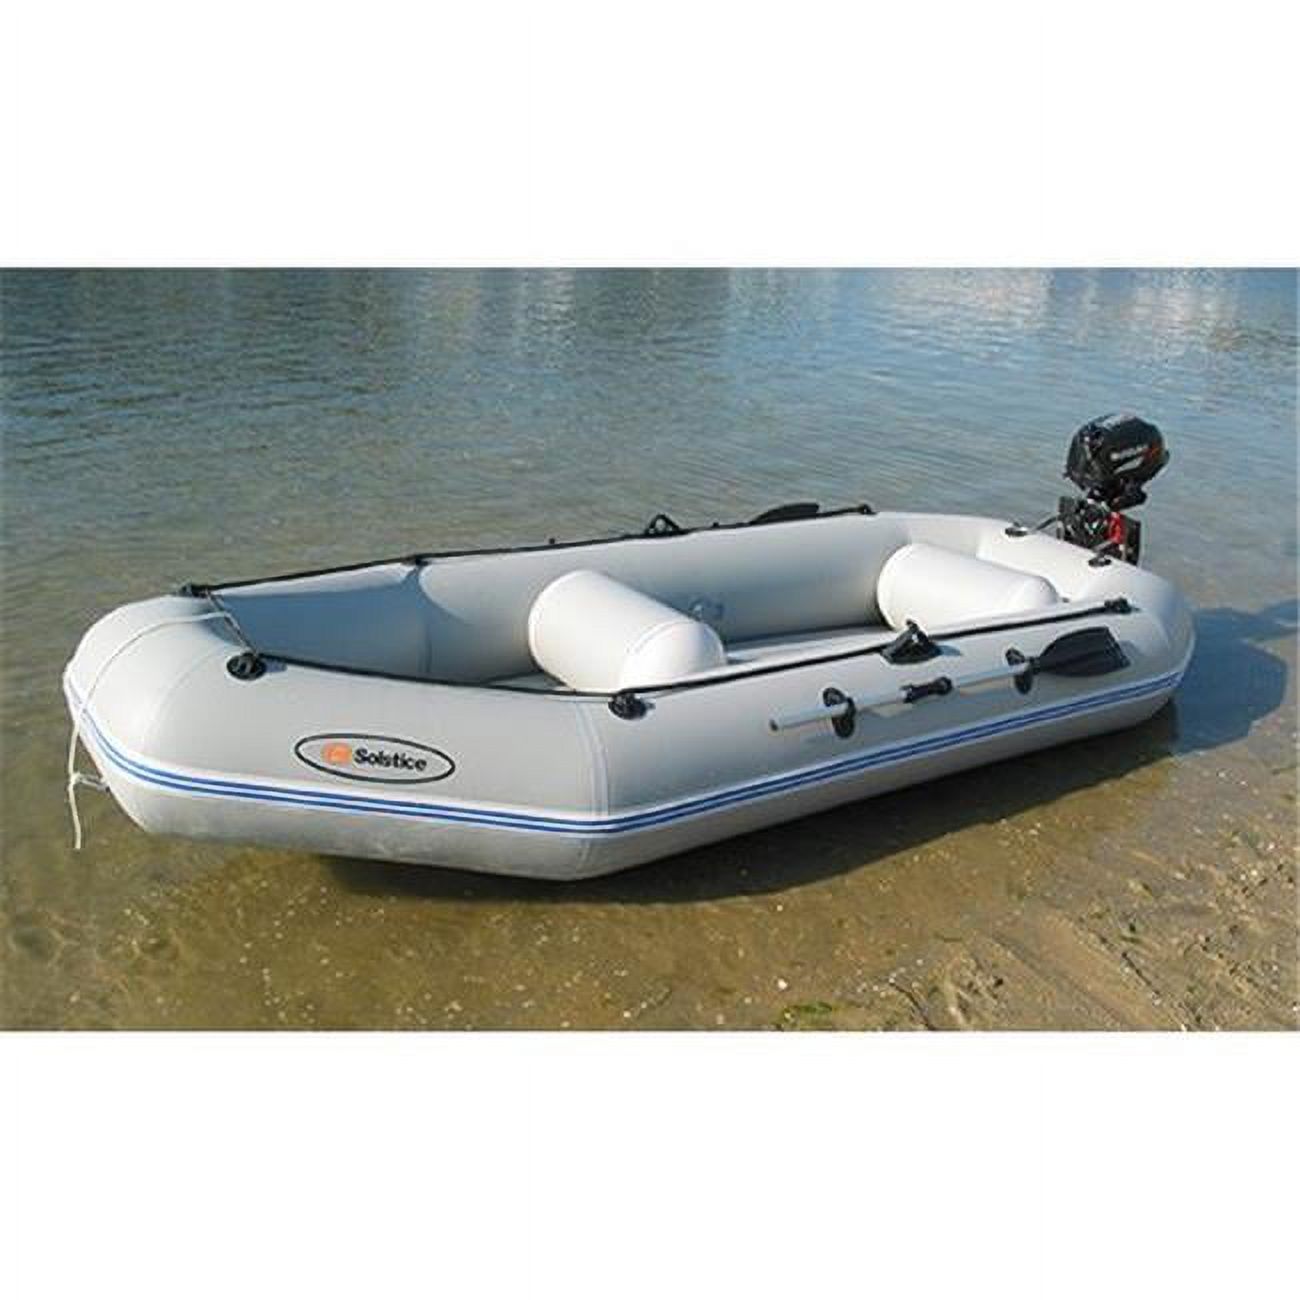 Solstice 20361 12 ft. Quest Inflatable Boat Set - image 1 of 2